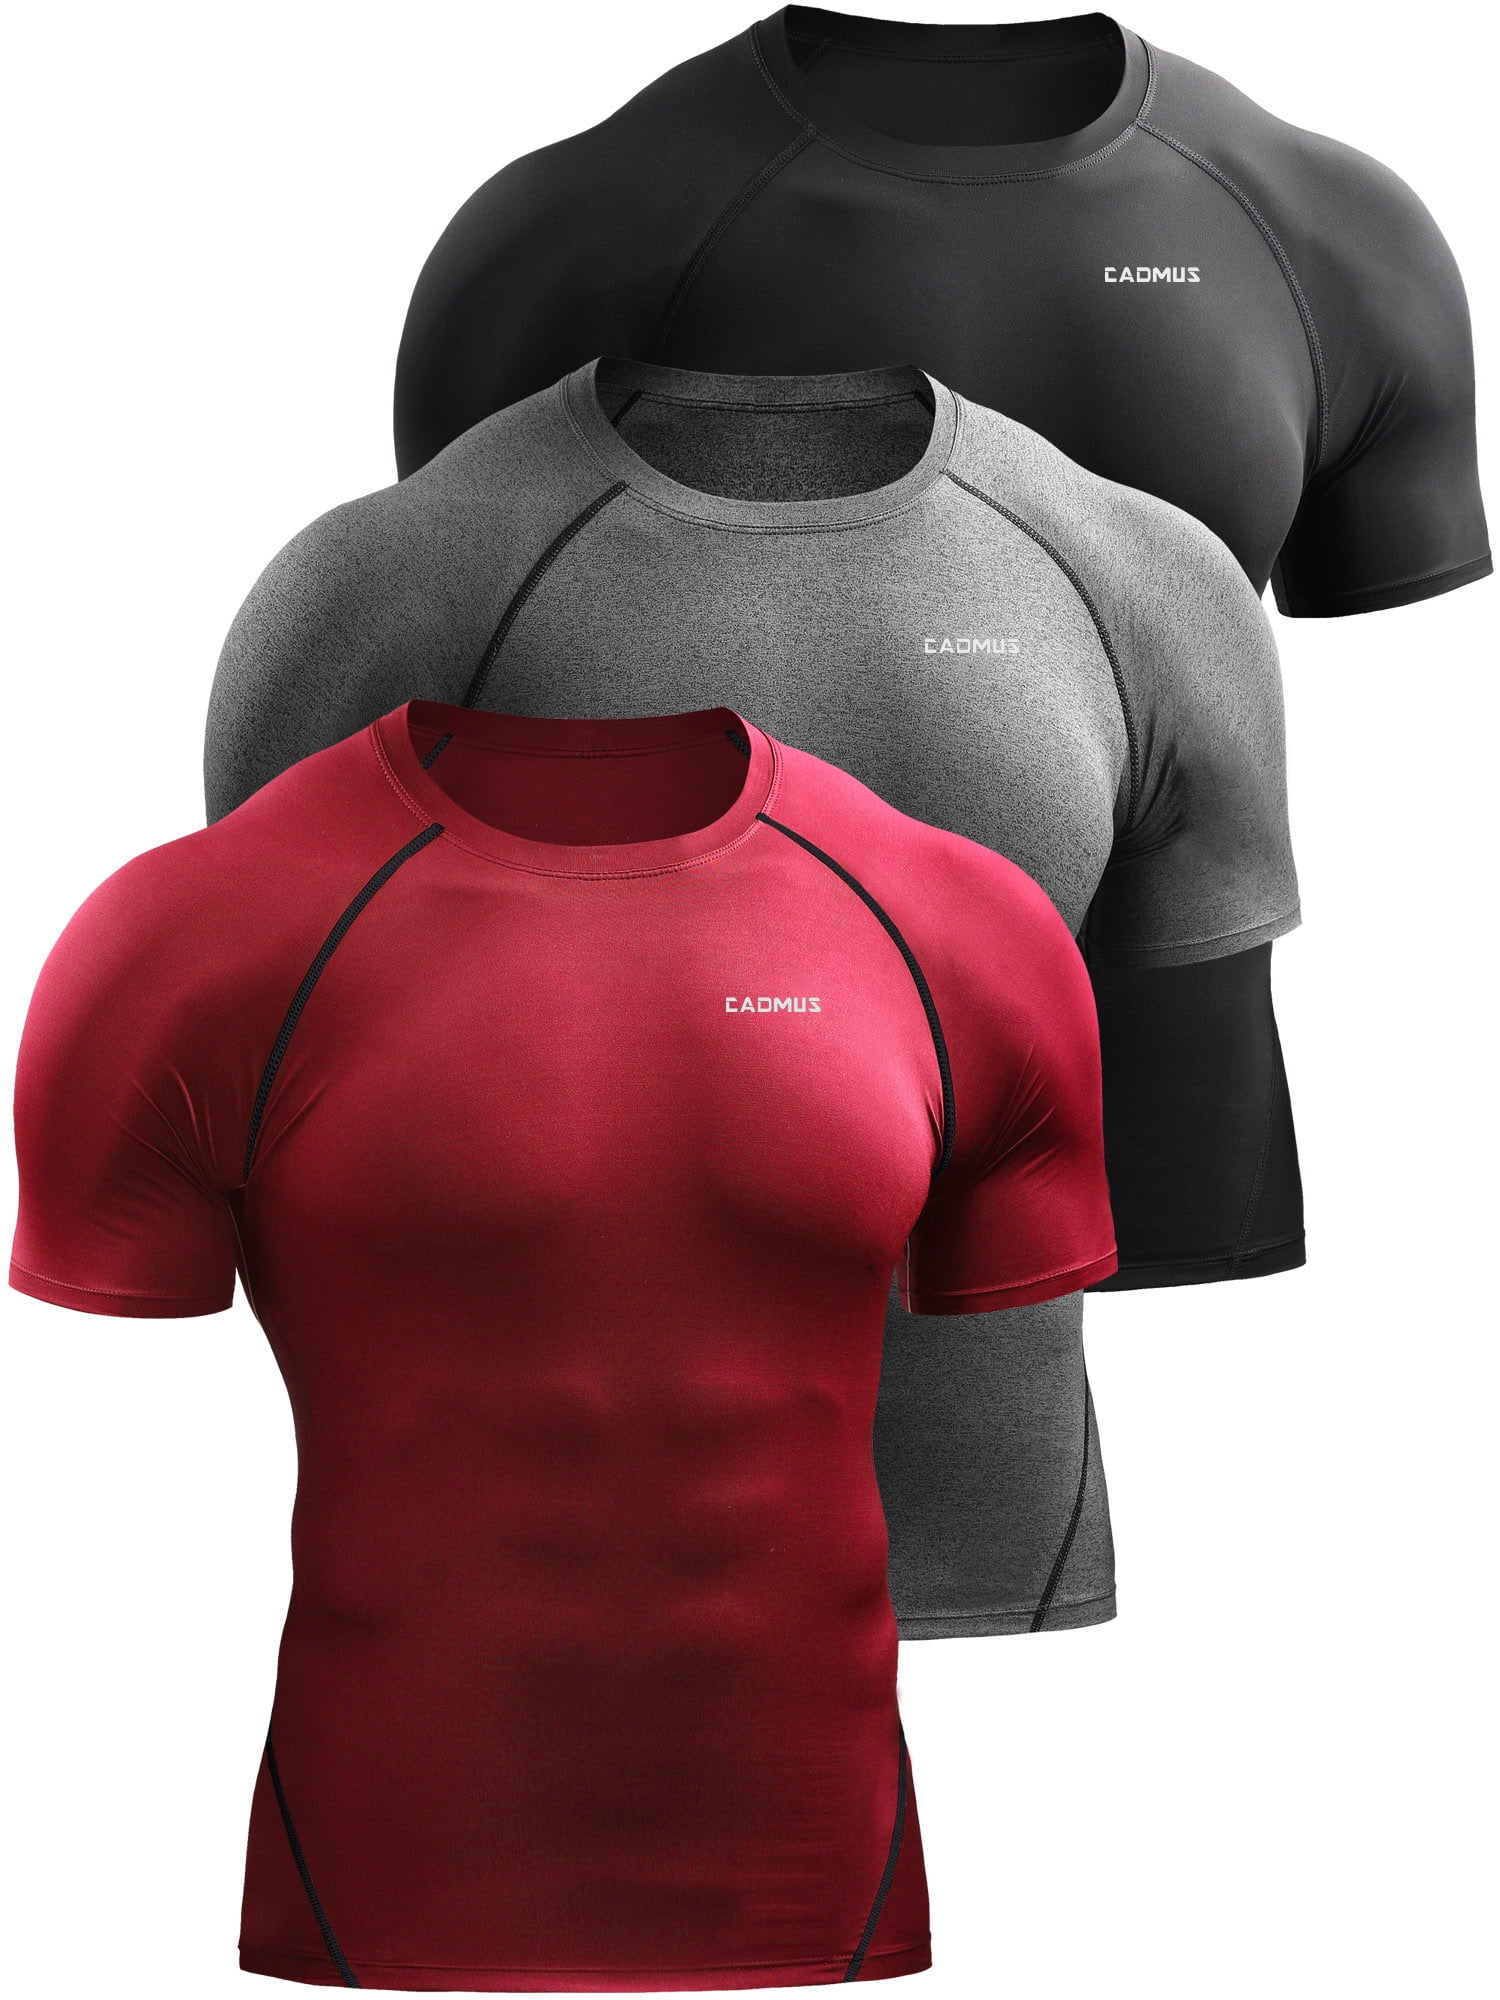 Under Armour Heatgear Dynasty Compression T Red 1238775-600 - Free Shipping  at LASC